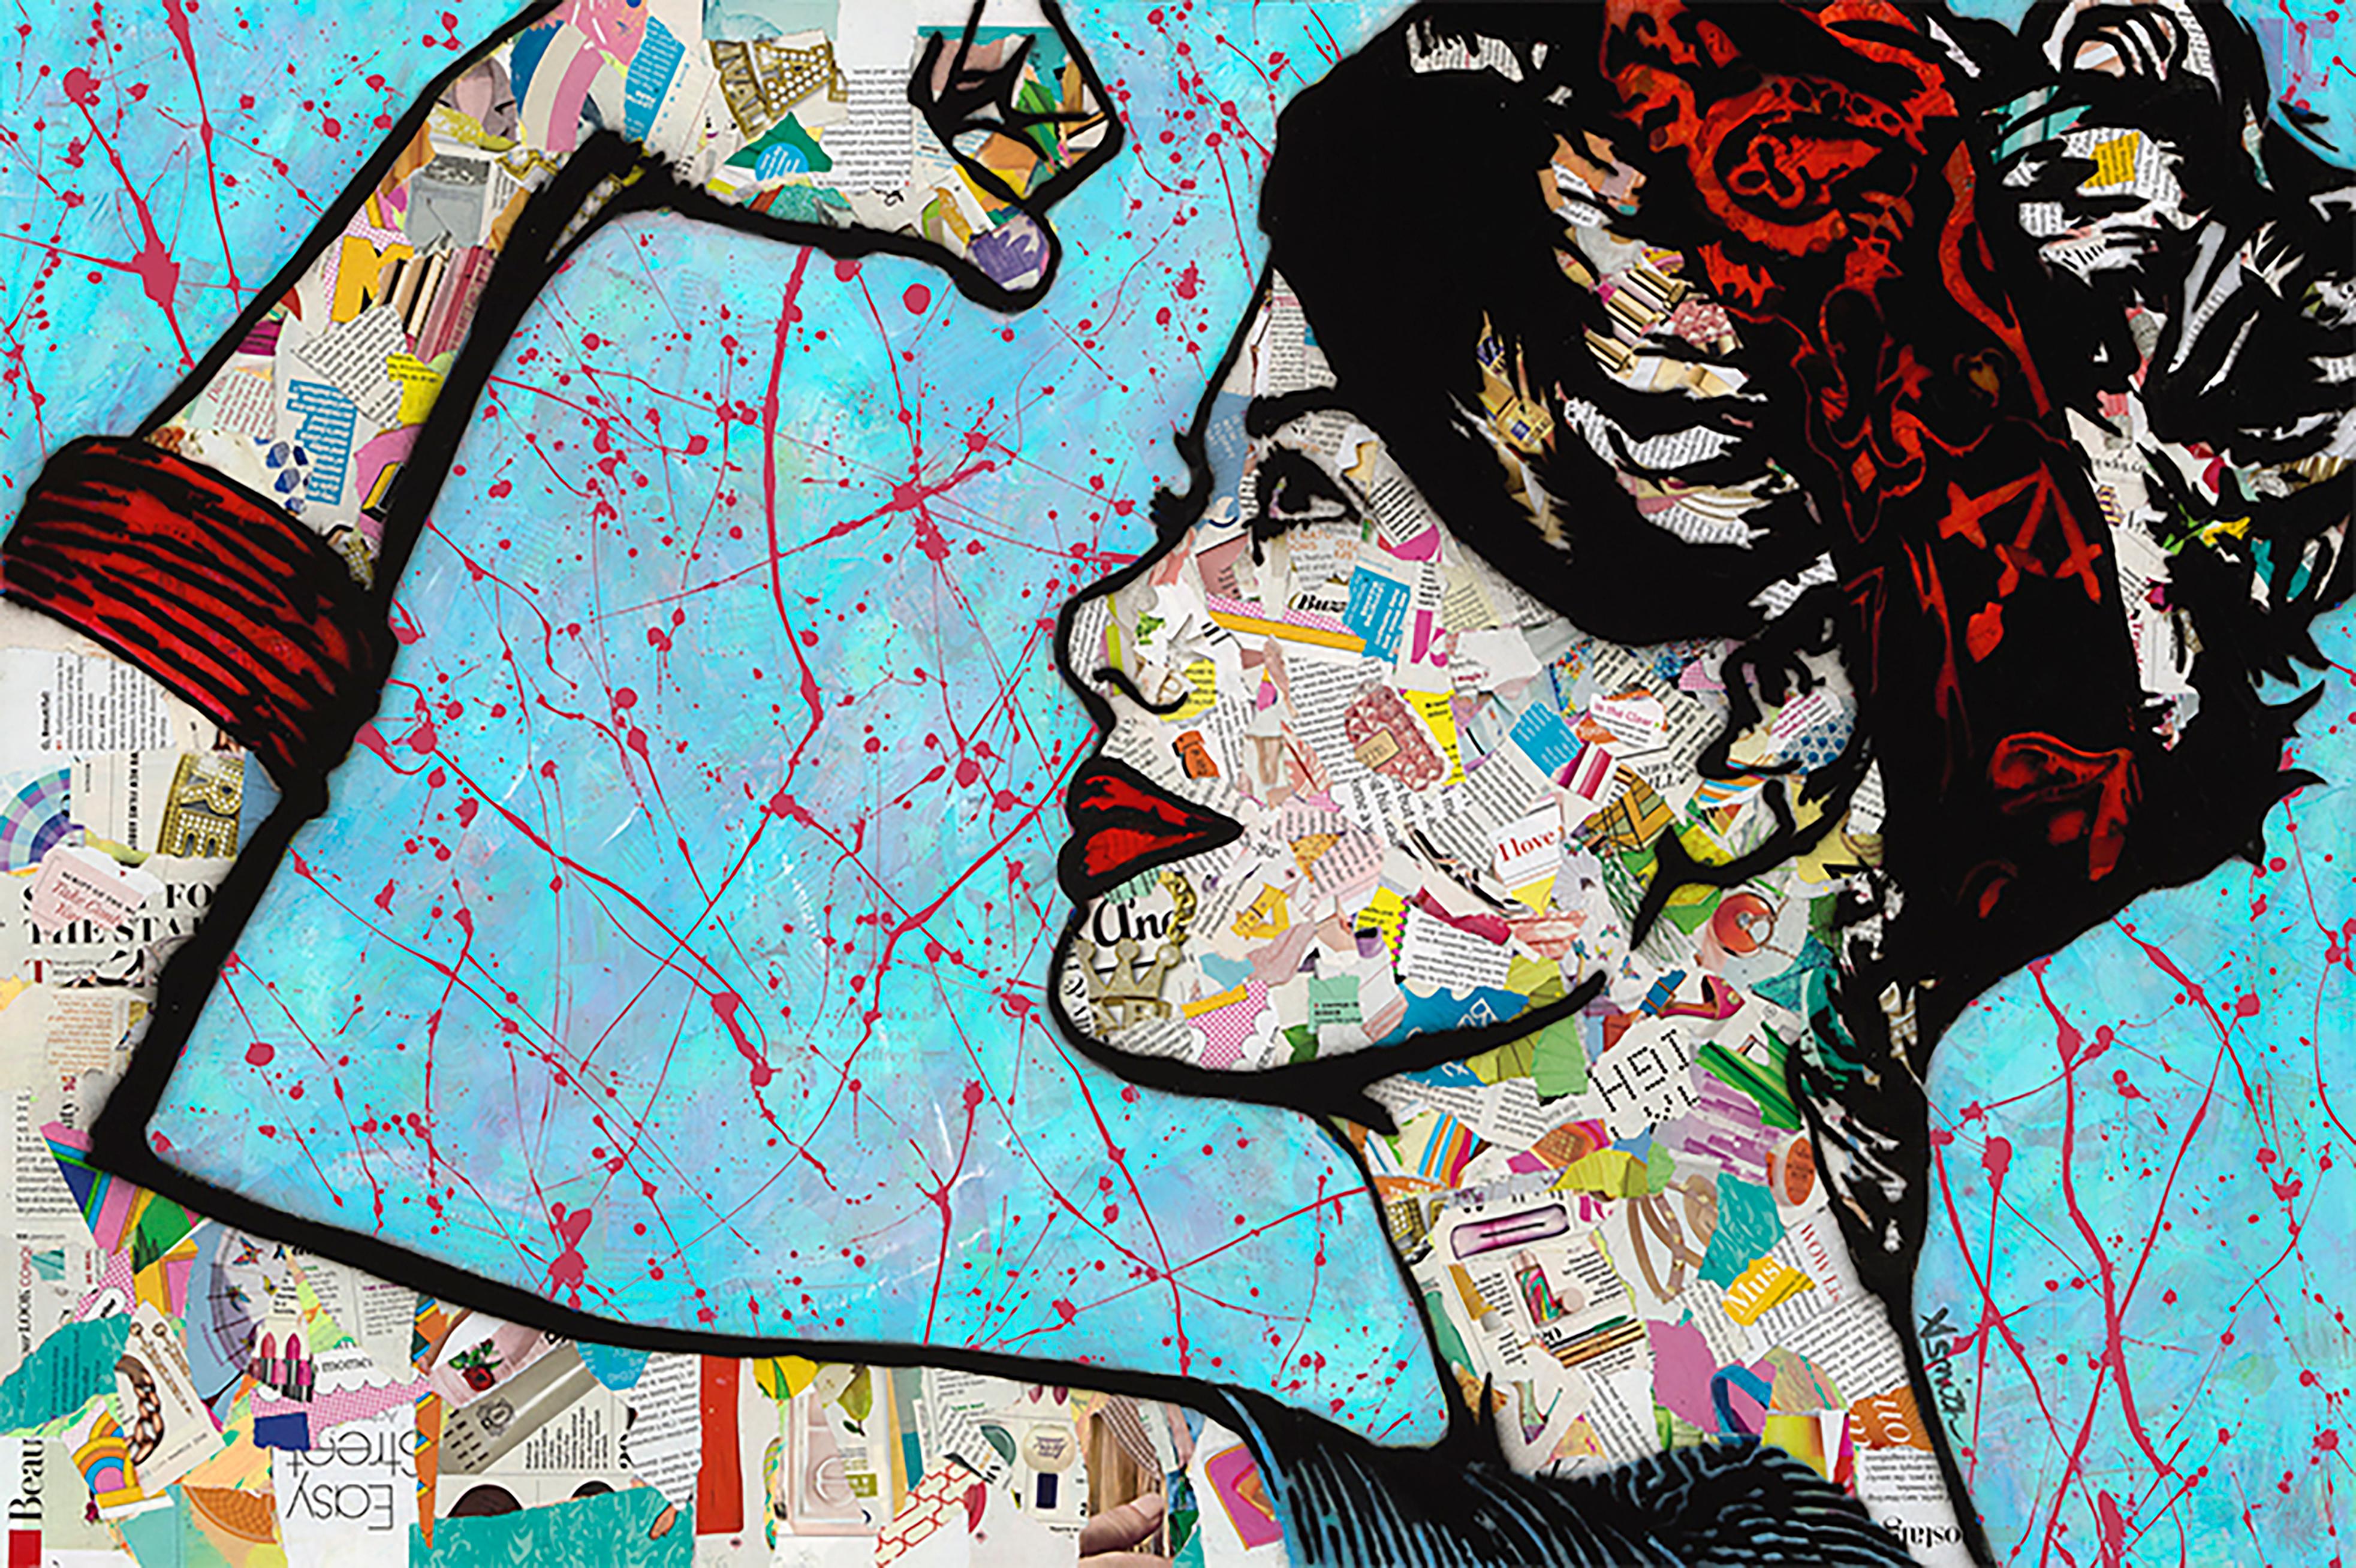 Amy Smith Figurative Painting - "Stronger" - Mixed Media Collage and Acrylic on Canvas